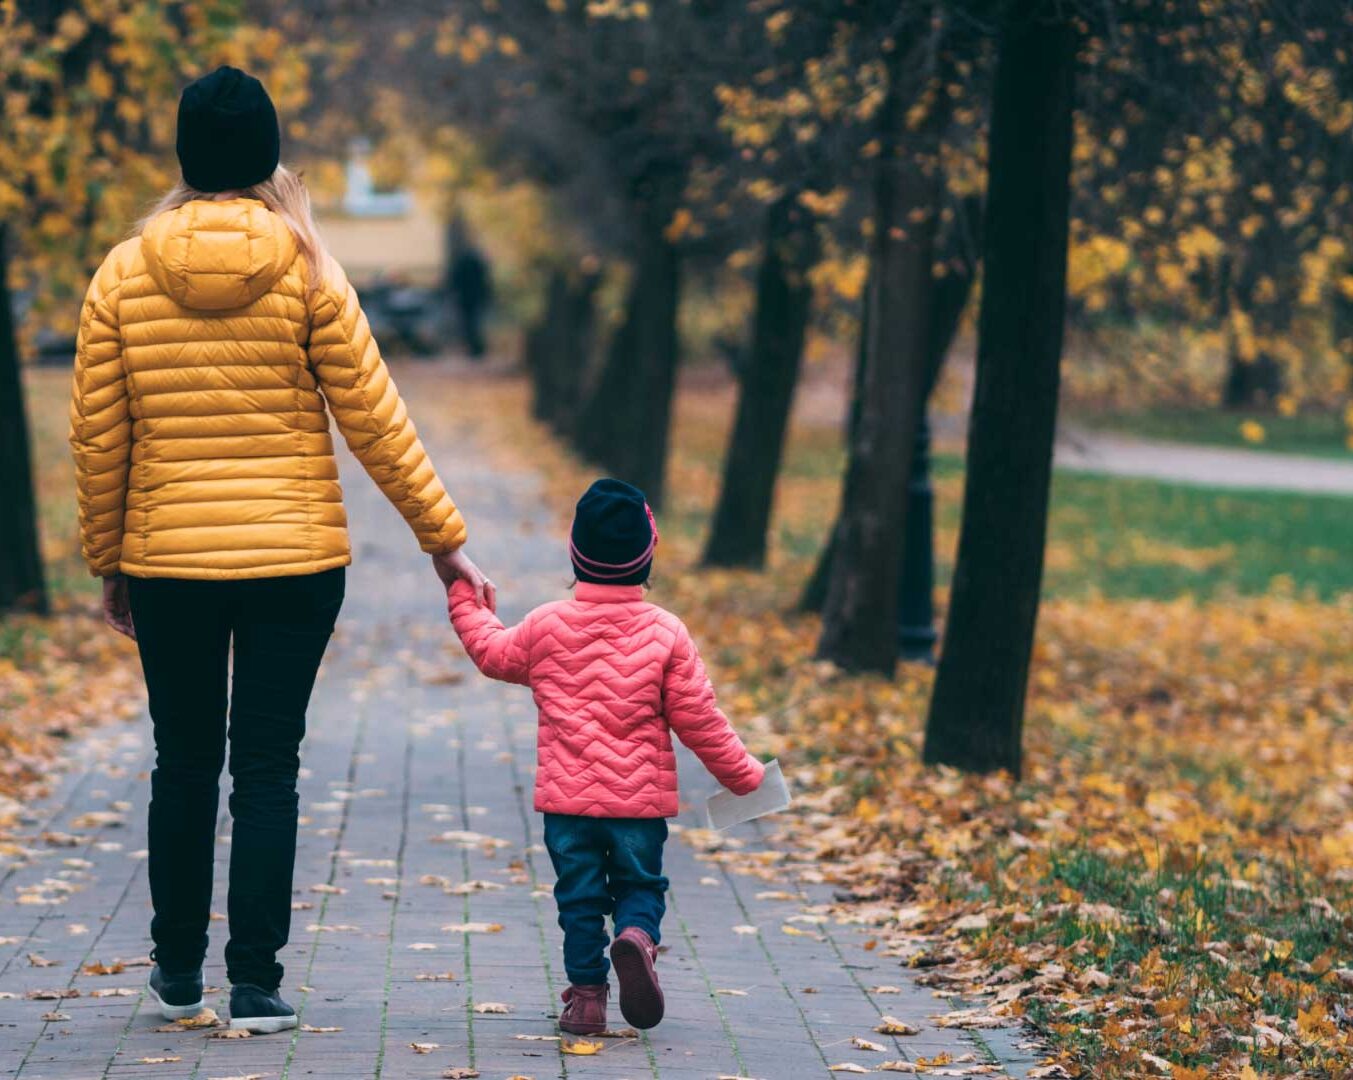 A photo of a woman and child walking, taken from behind. The woman is holding the child's hand. Trees and fall leaves line the path ahead of them. Credit Krzysztof Kowalik.